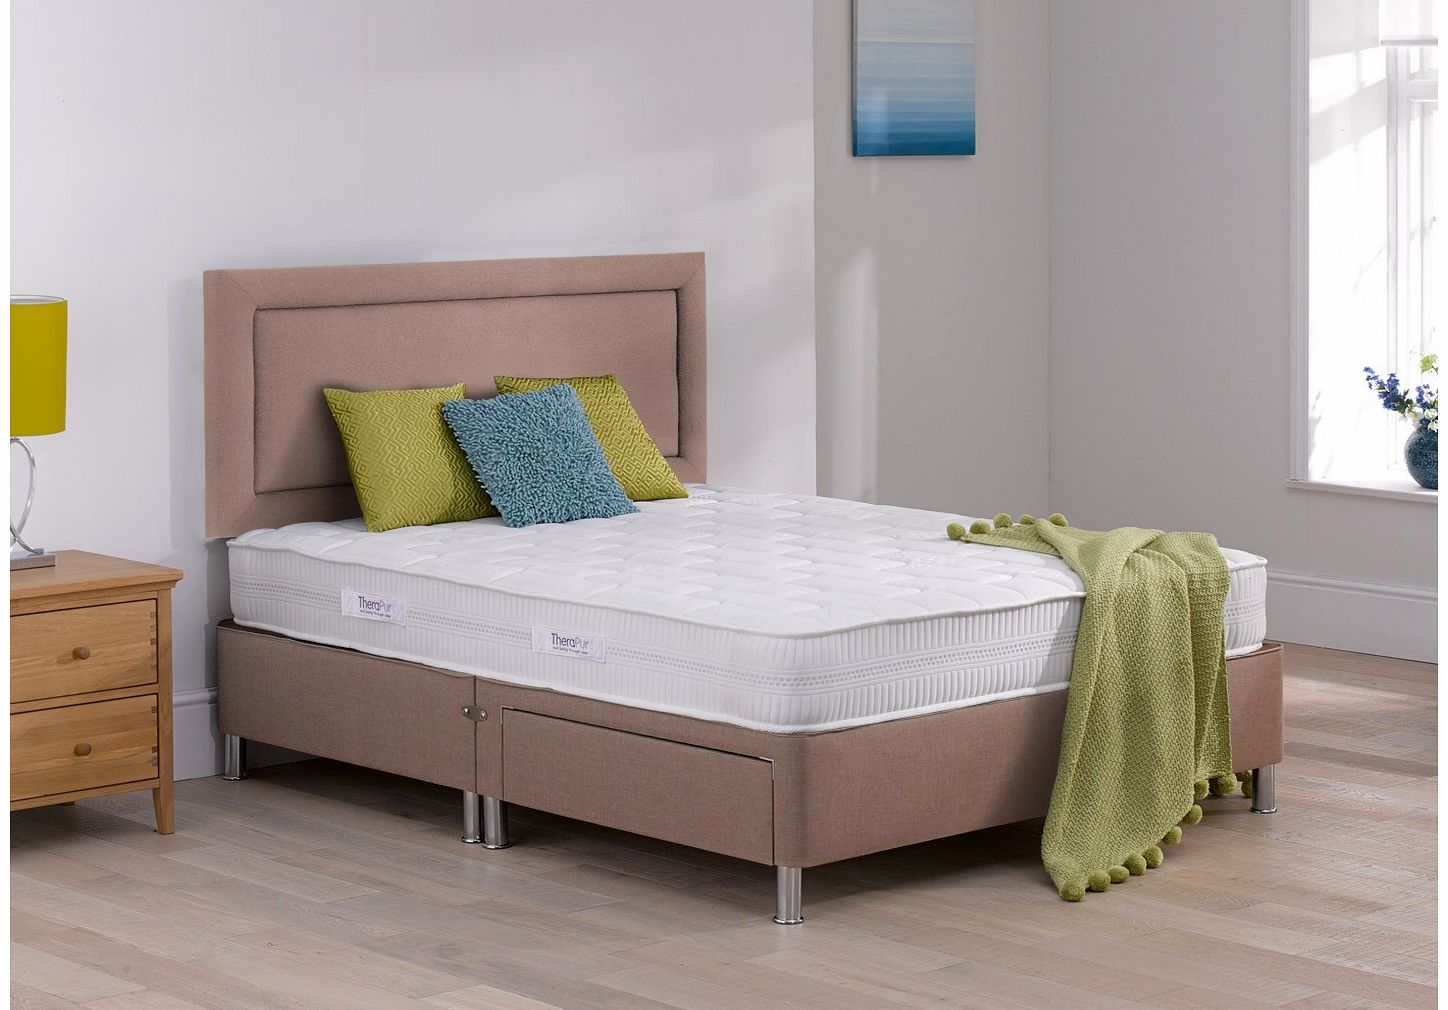 4`6 Double Therapur Bliss 22 Divan Bed With Legs - Medium